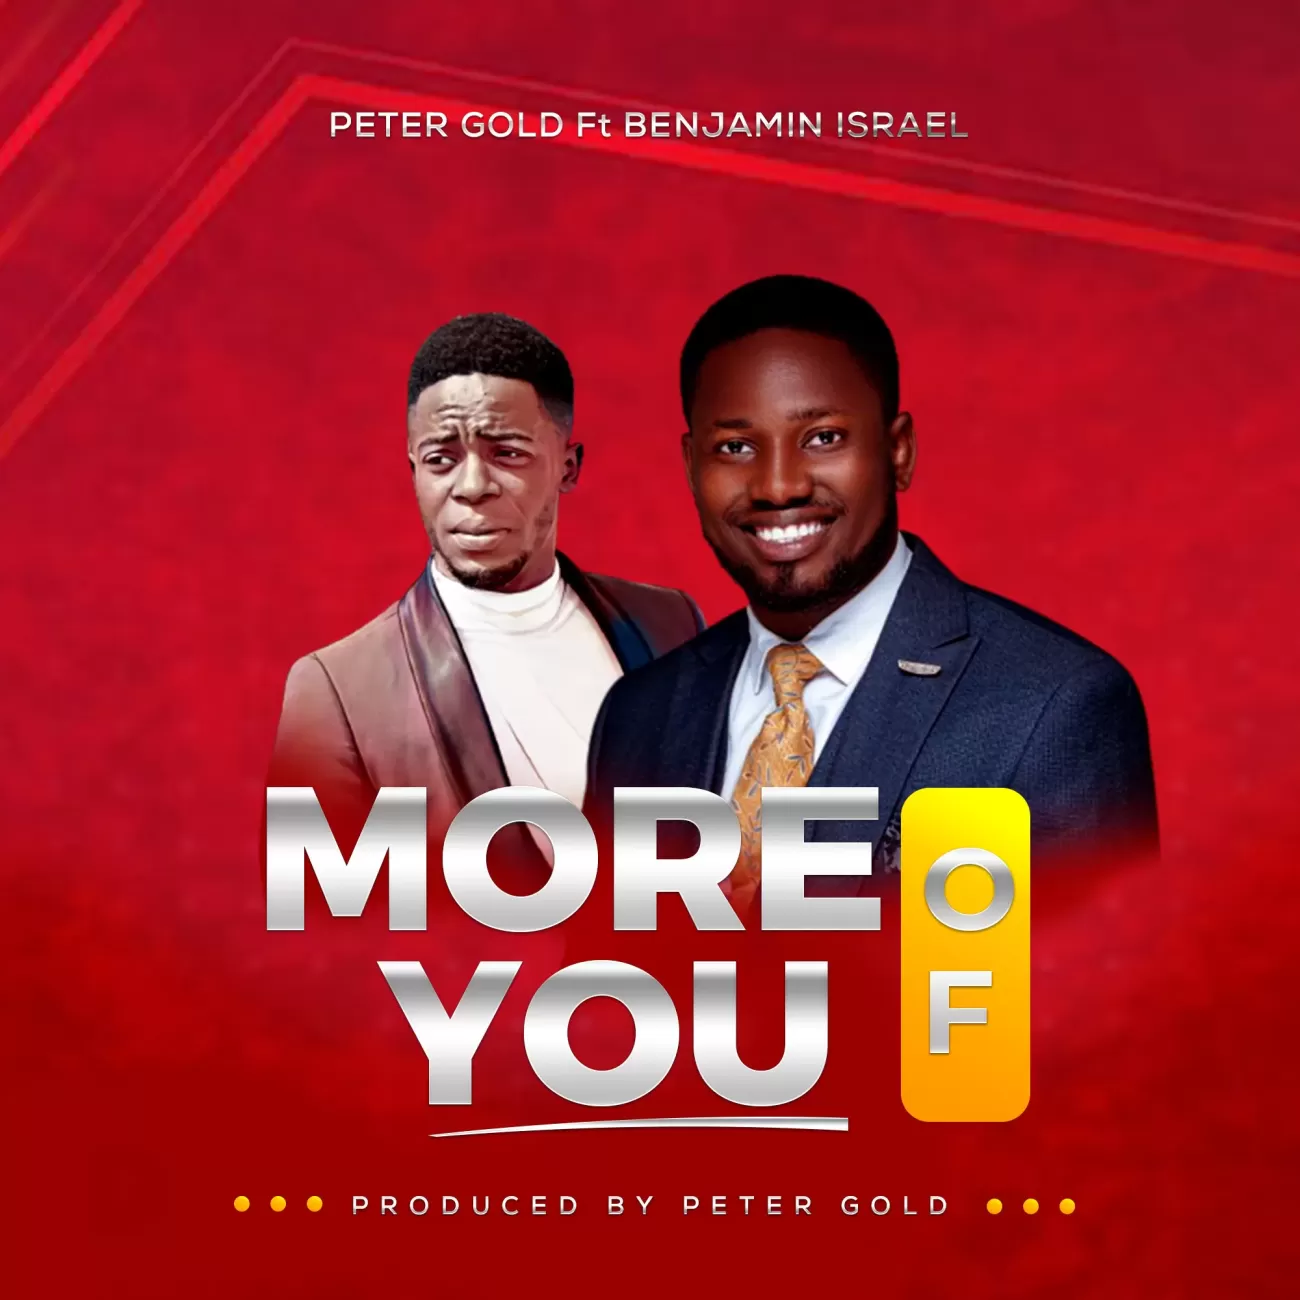 More of you by Peter Gold ft Benjamin Isreal